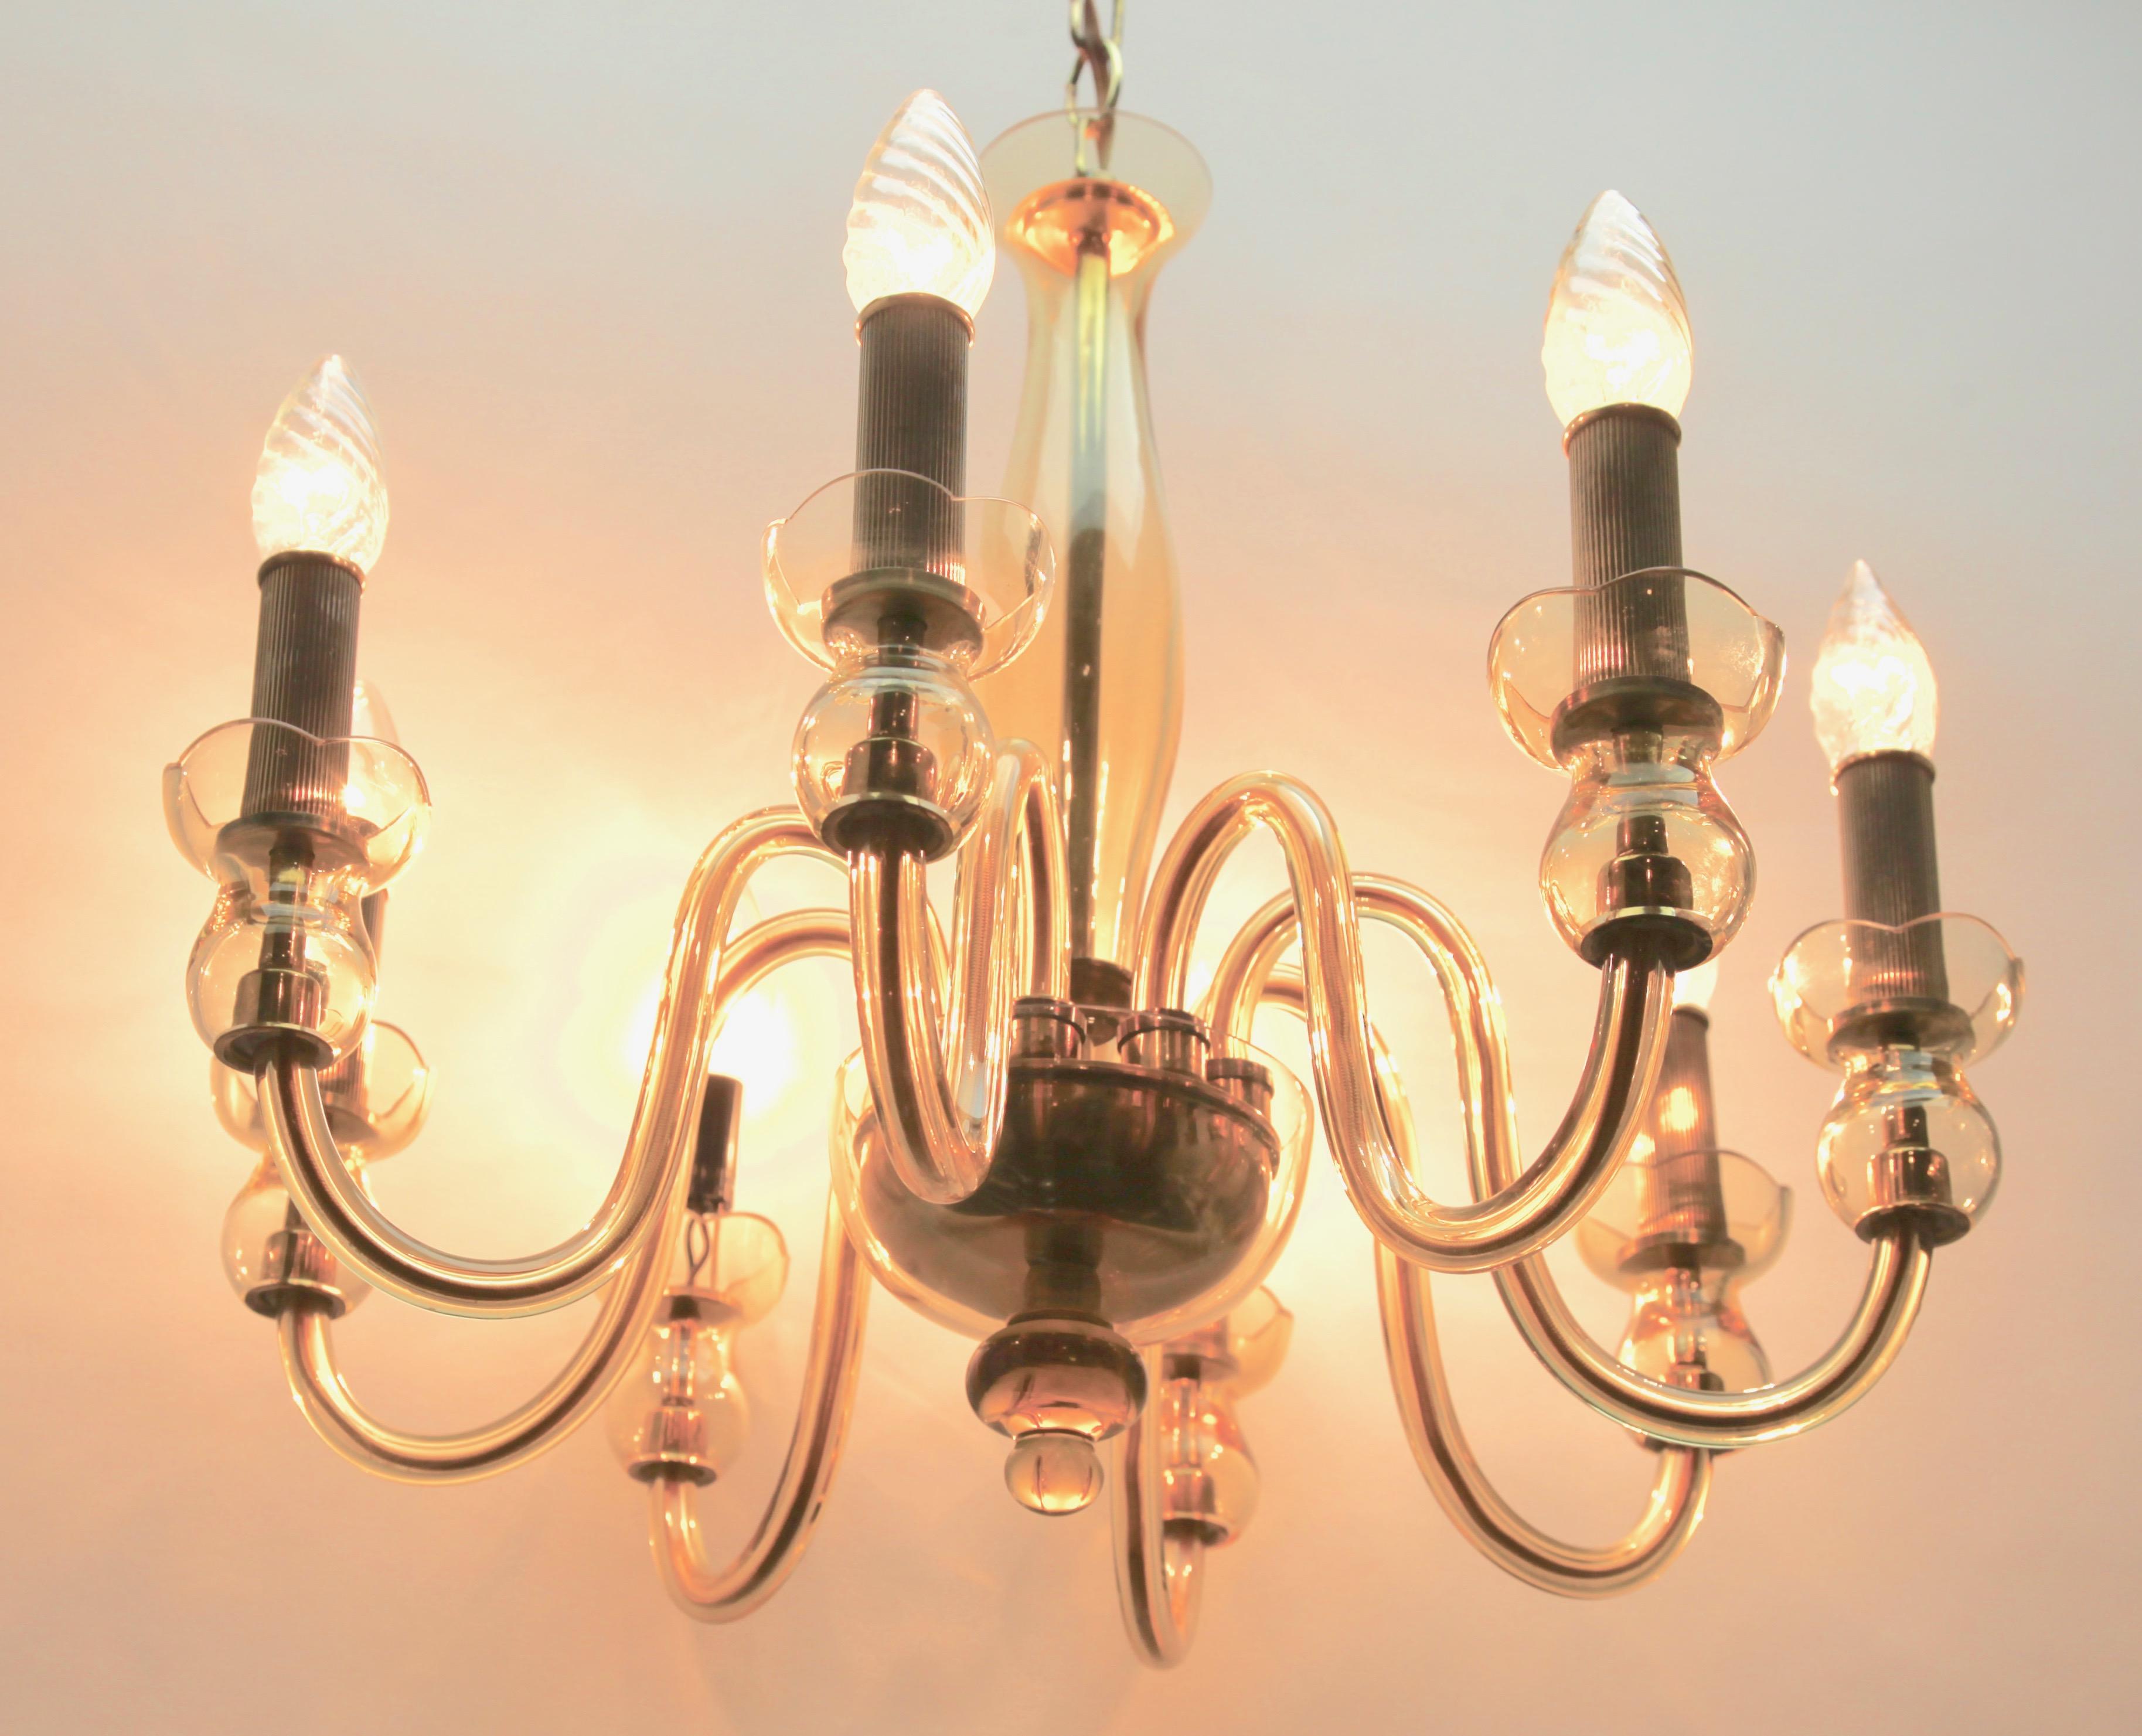 8 light chandelier made of hand blown smooth crystal glass infused 
with a combination of minerals to produce amber color;
Handcrafted in the Czech Republic.

As service: We can adjust the lamp Height for you in advance if needed. 
Every